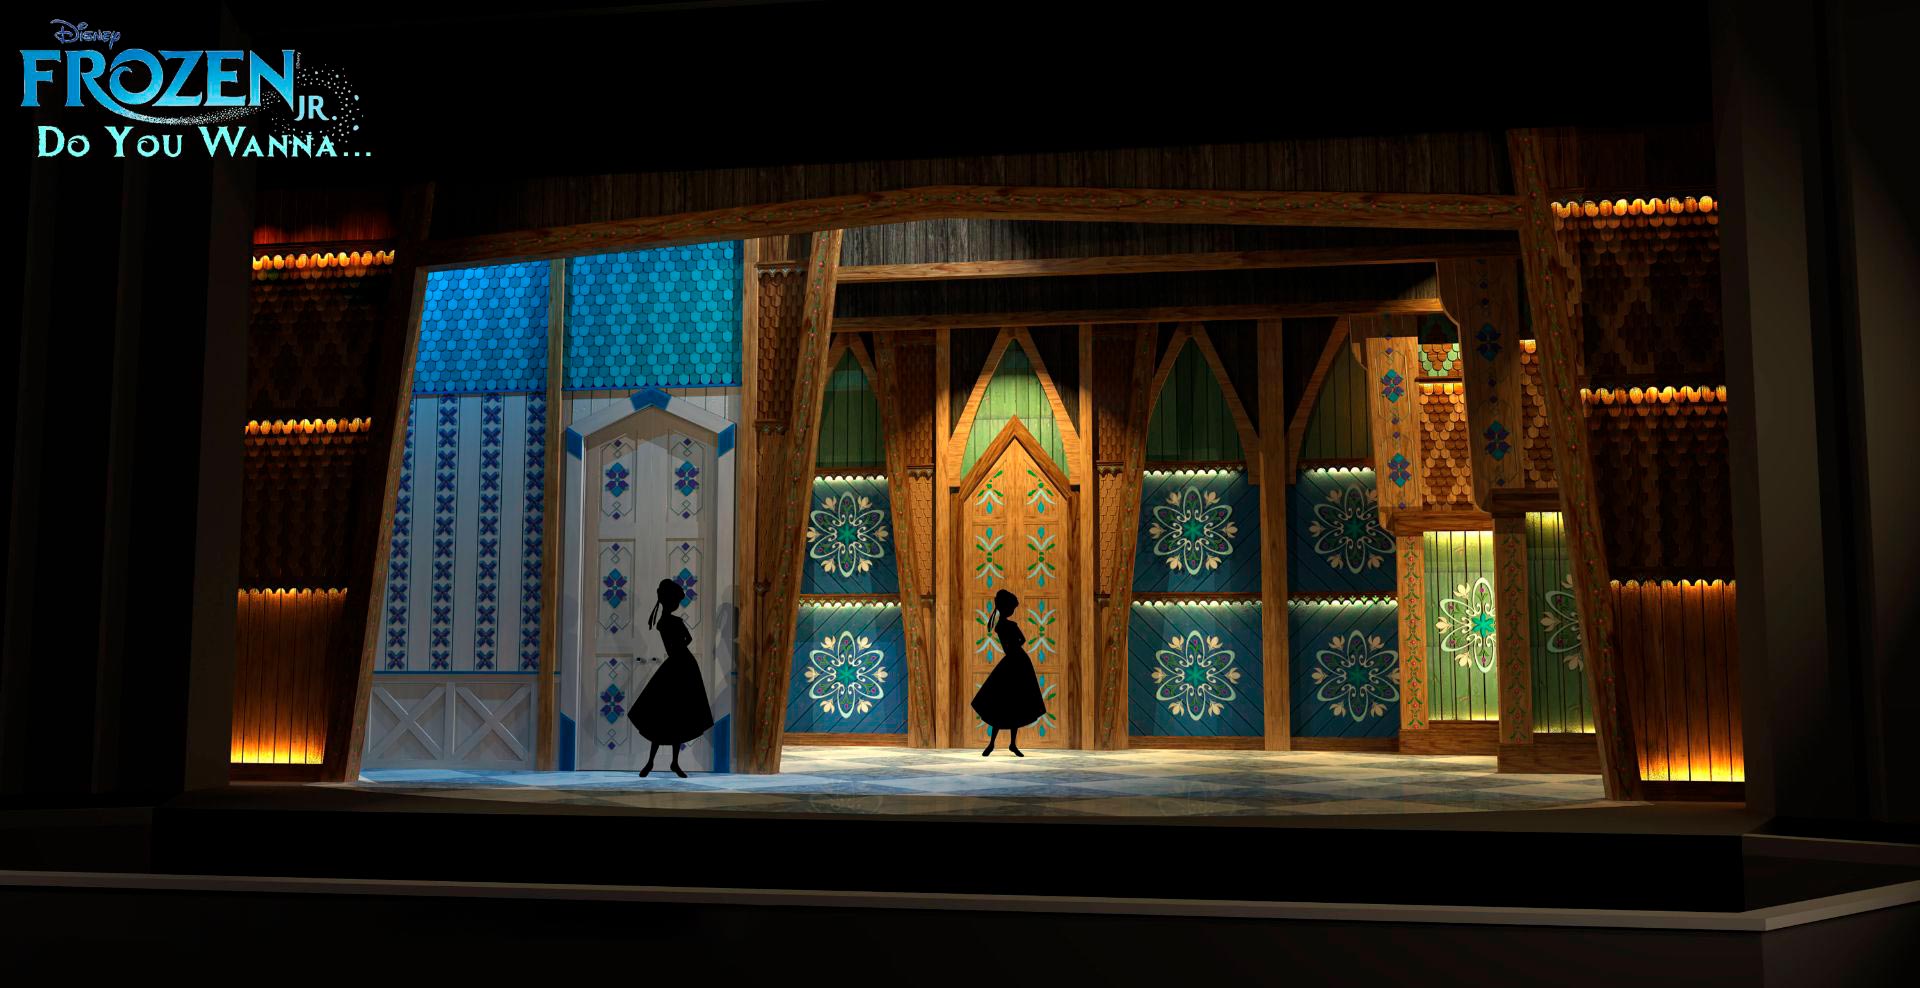 Frozen Do You Wanna Build a Snow Man scenery rental set - Front Row Theatrical Rental - 800-250-3114